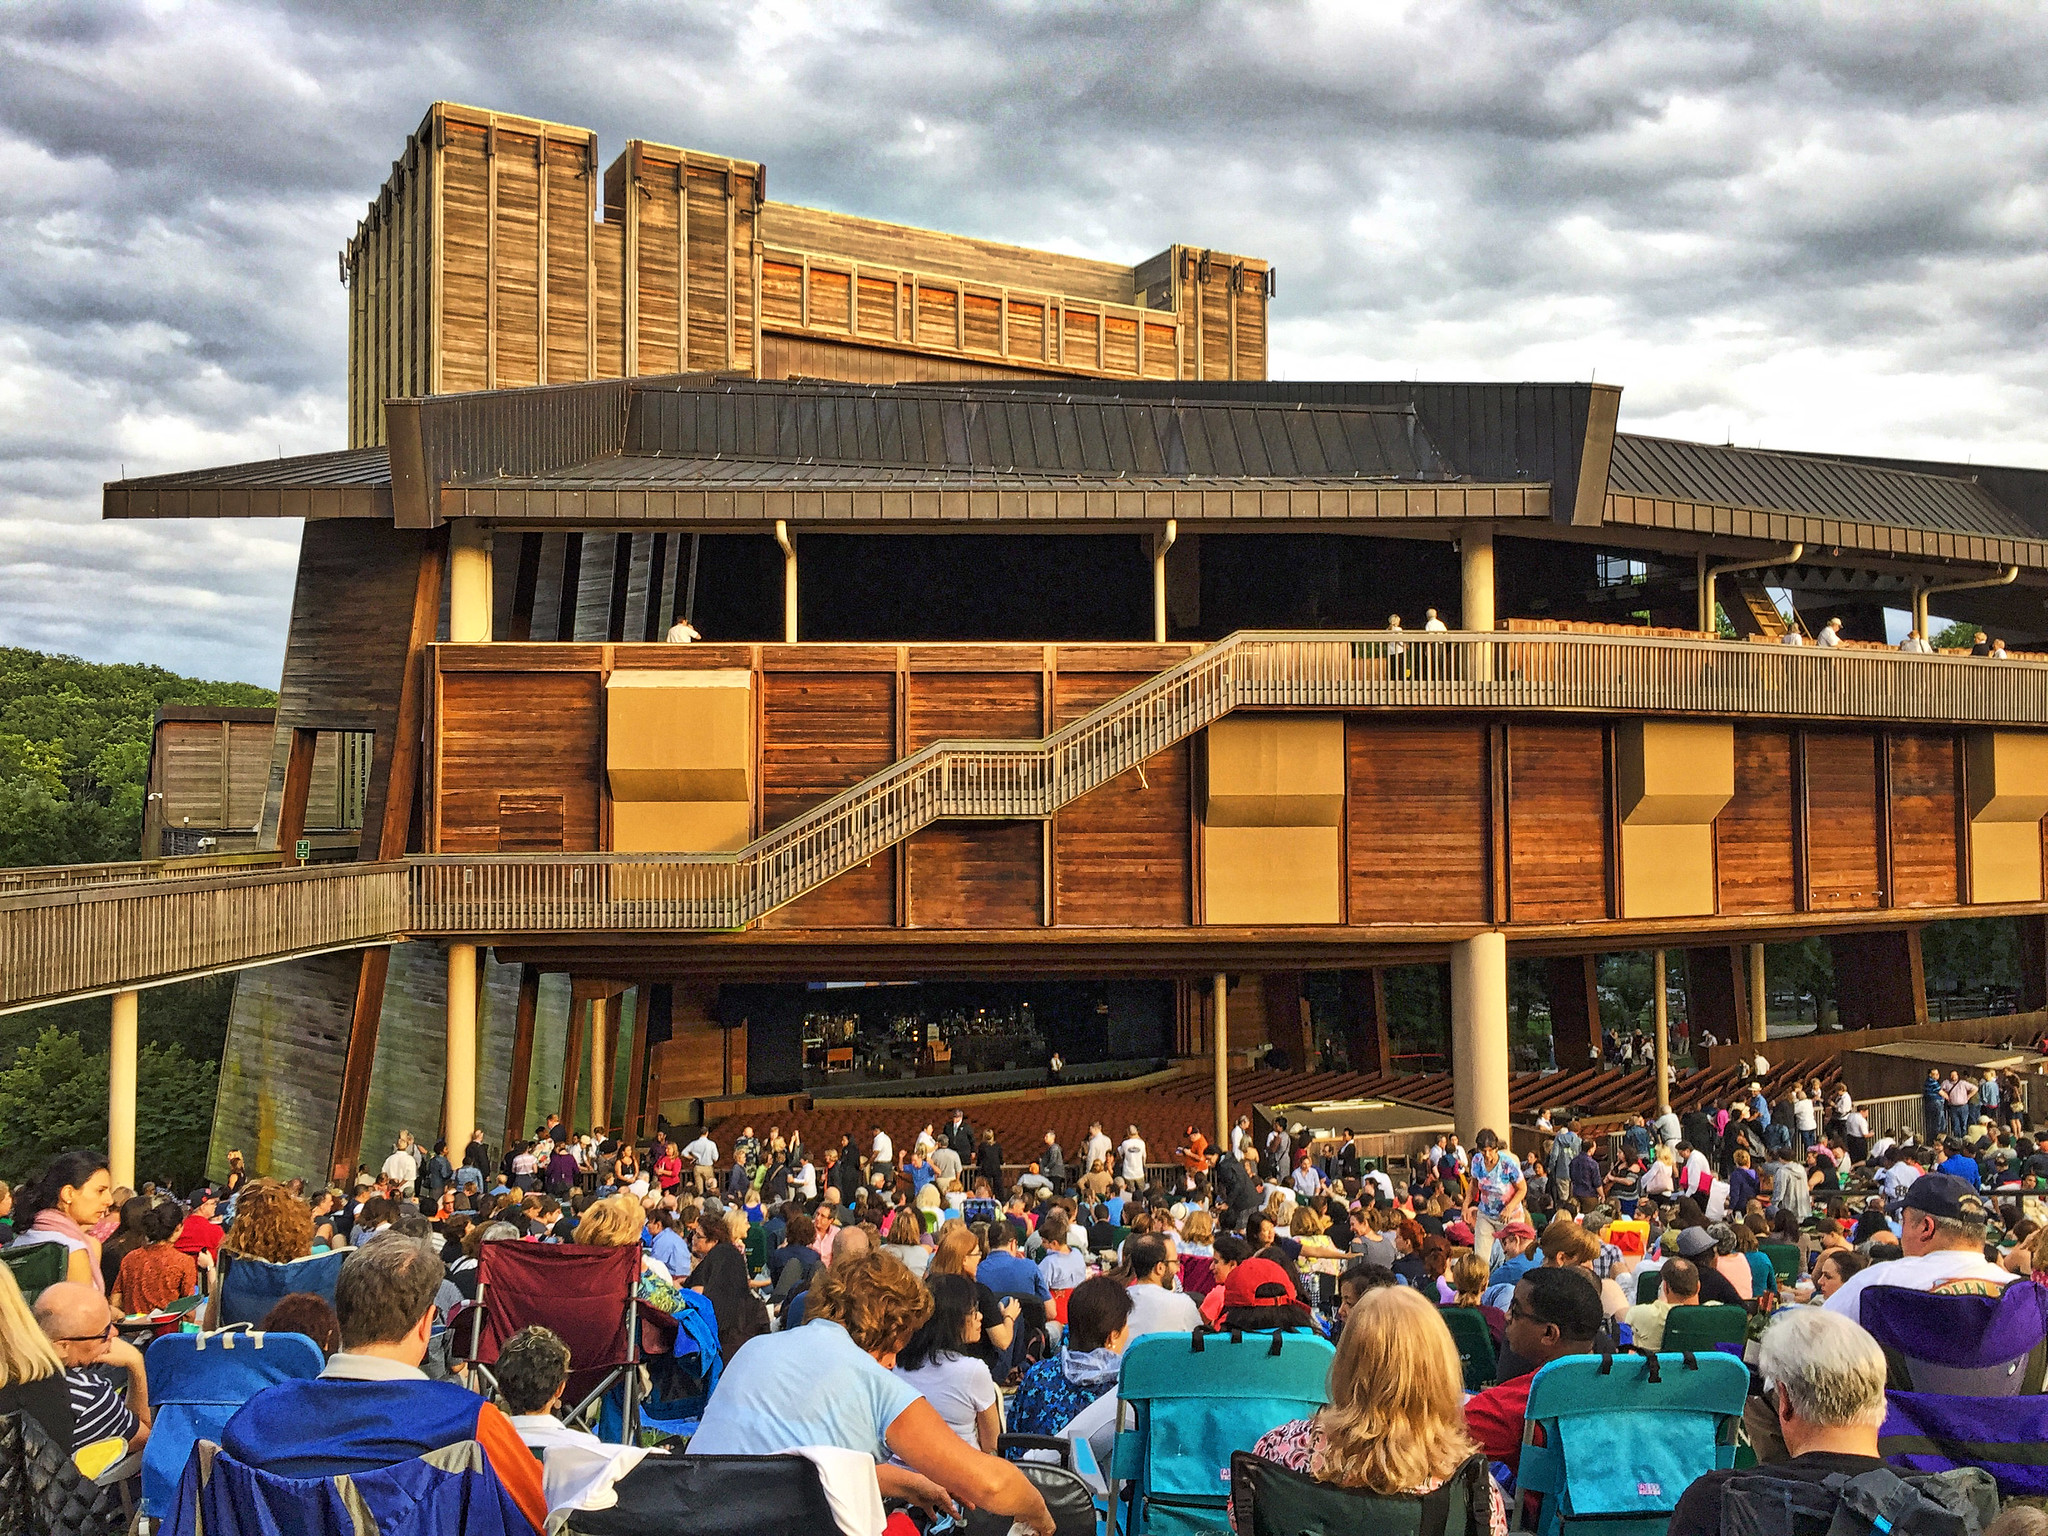 A large crowd sitting in front of the gigantic Wolf Trap National Park for the Performing Arts, one of the things to do in Virginia